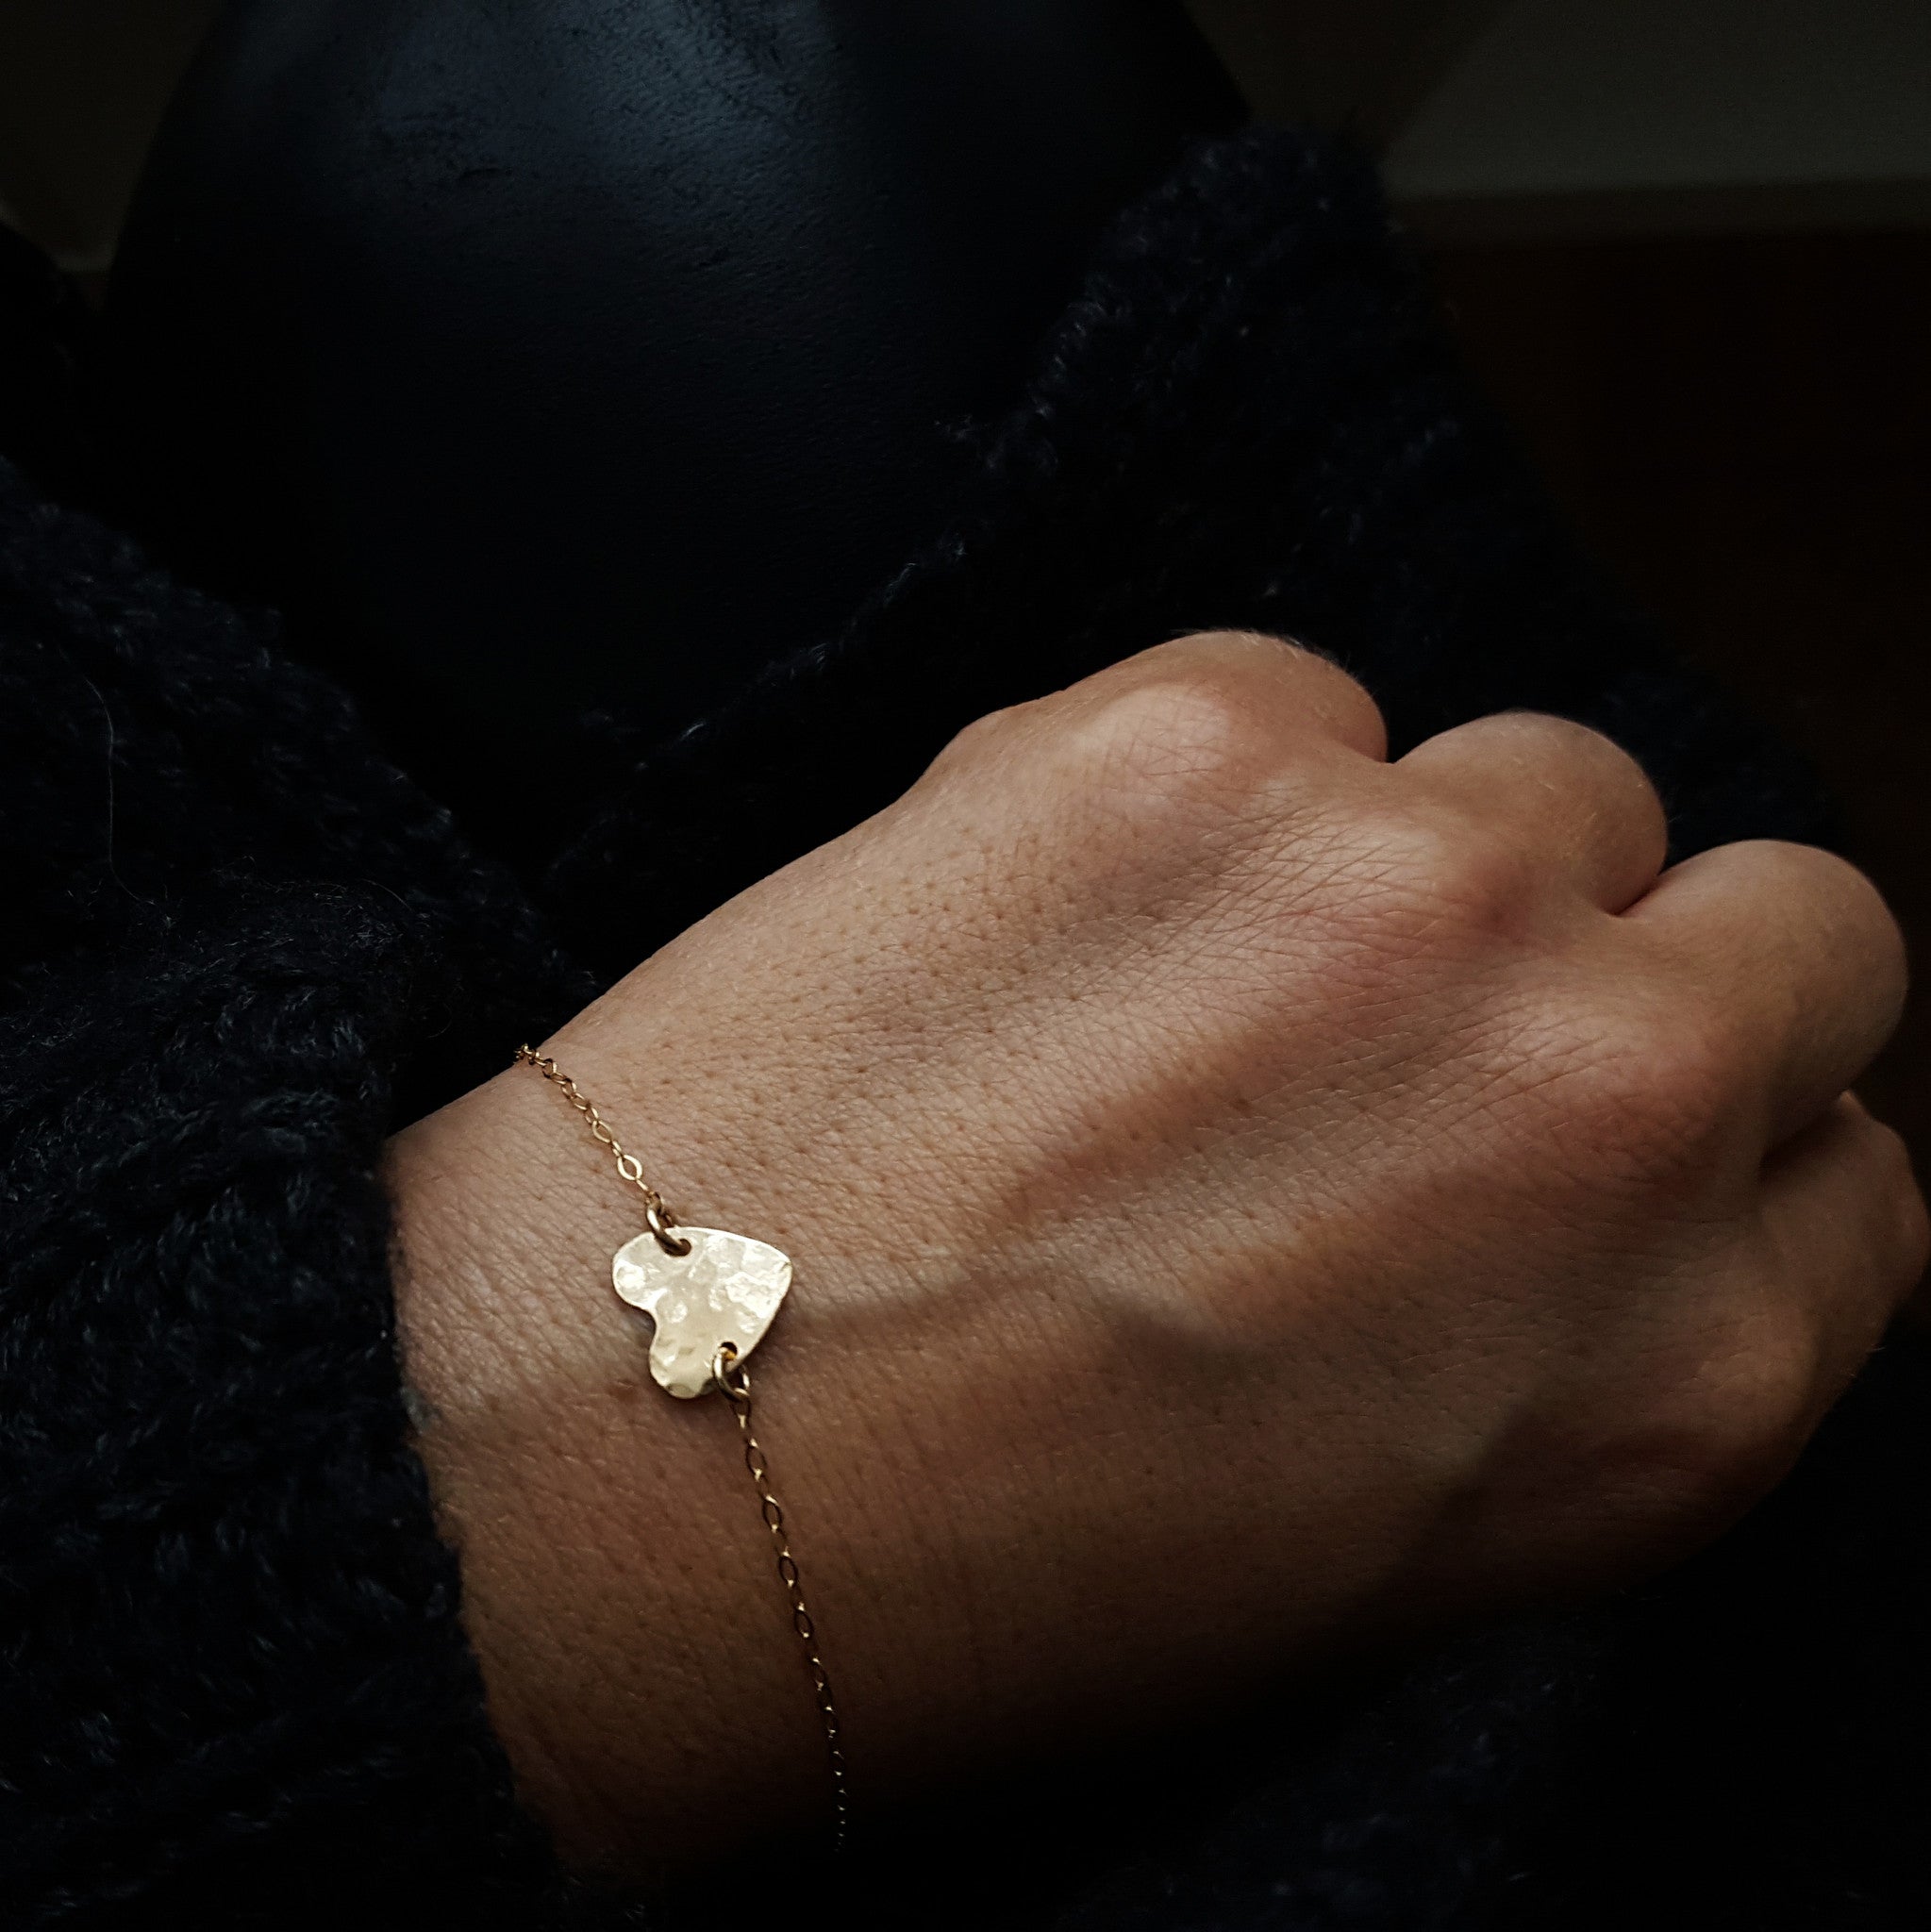 a close up of a wrist wearing a small chain bracelet connected by a small gold hammered heart pendant